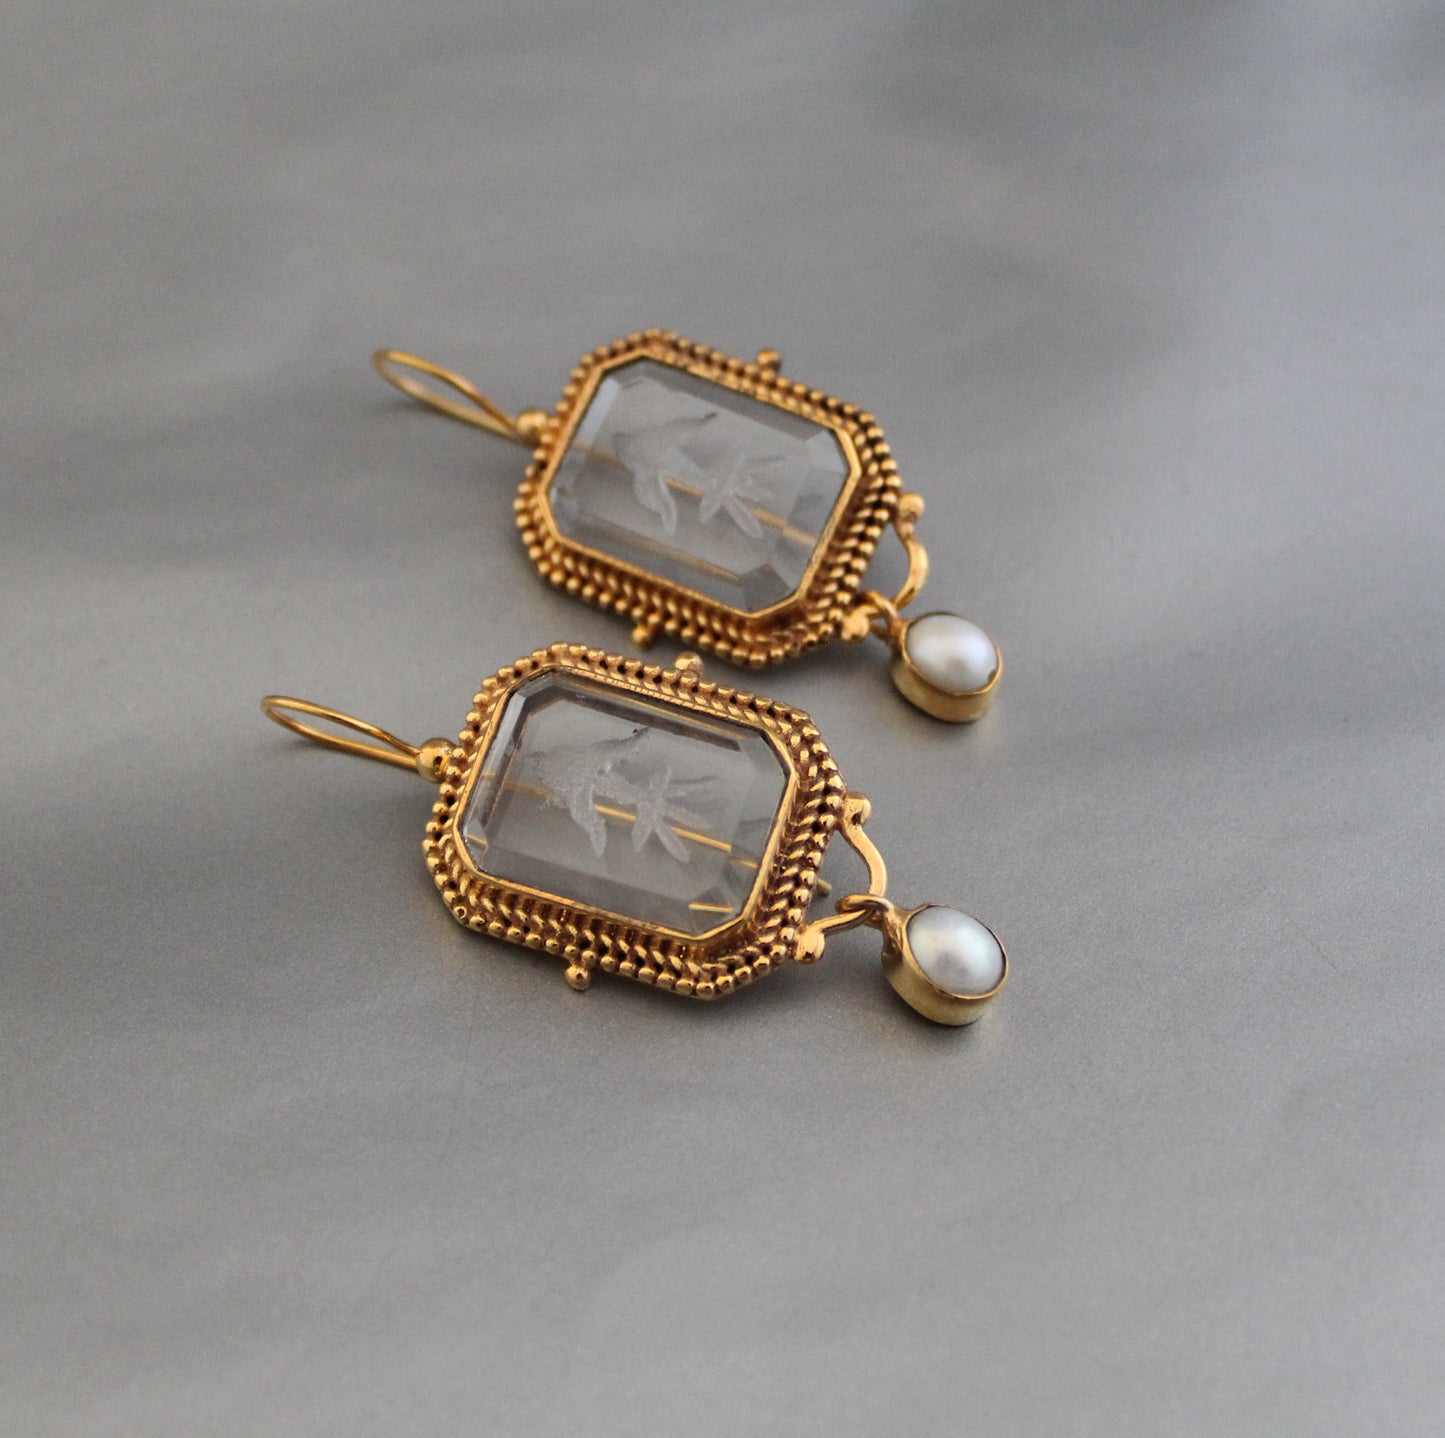 Clear Crystal Intaglio Antique vintage Jewelry, Wedding Earrings